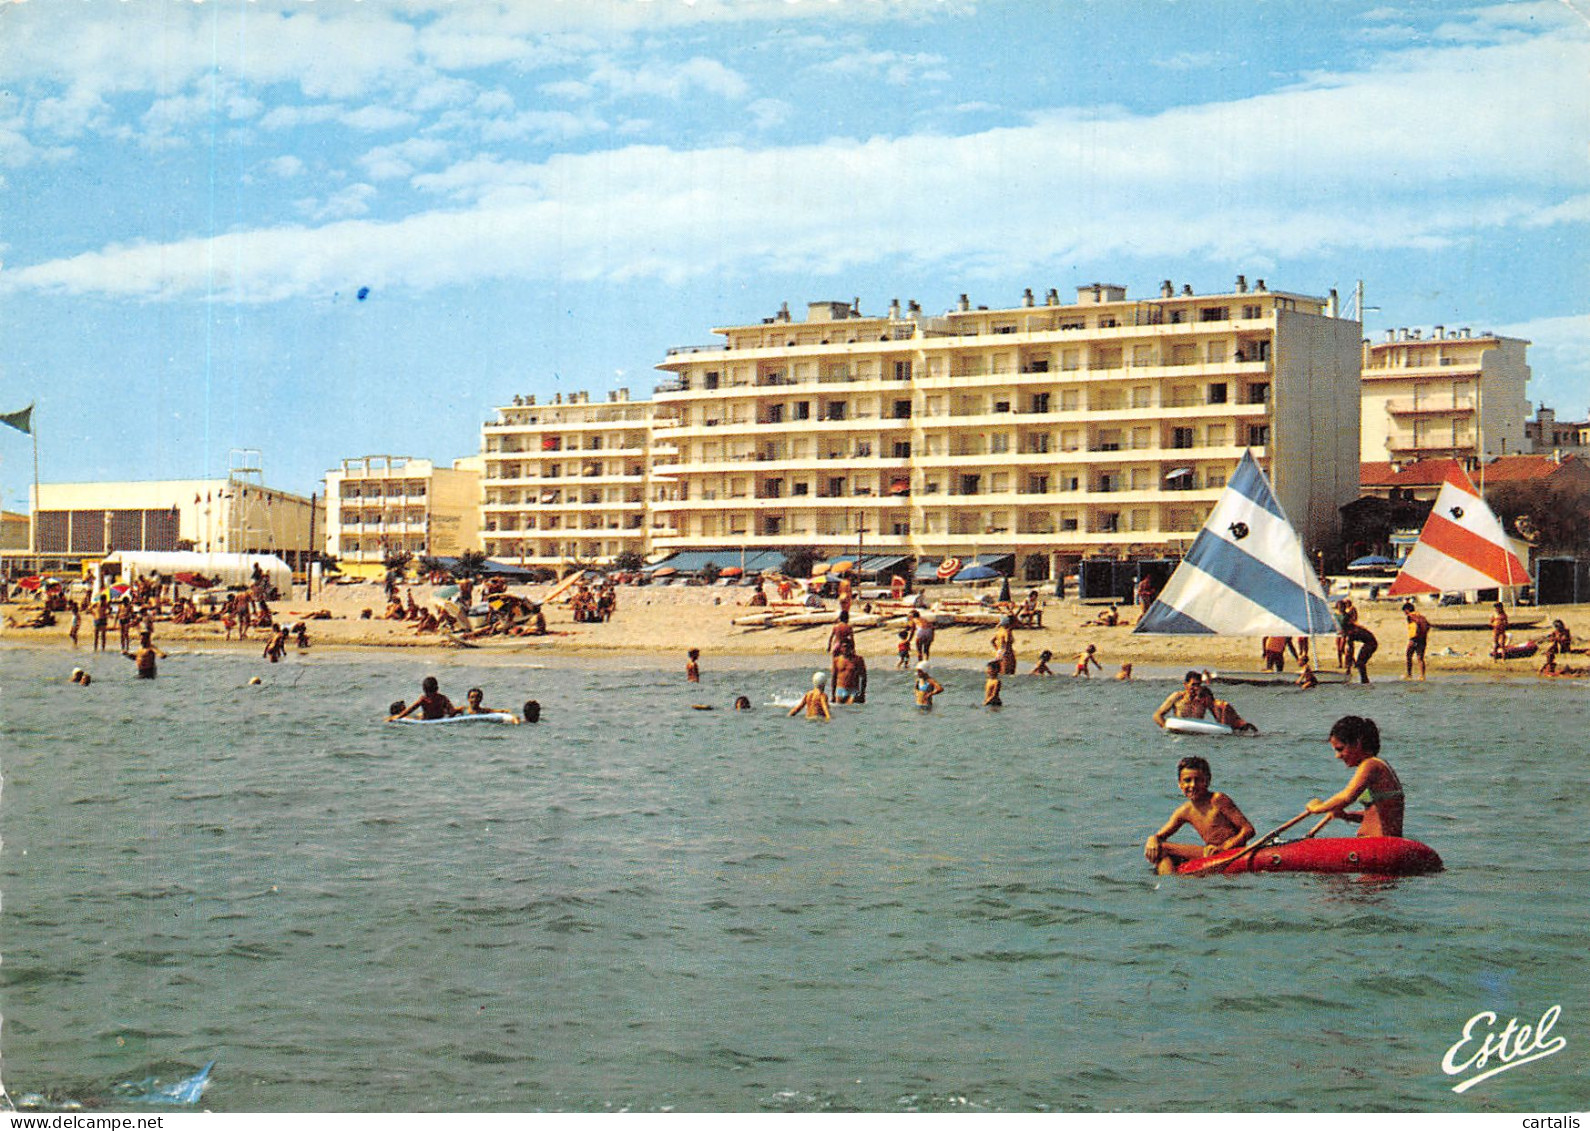 66-CANET PLAGE-N°4203-D/0217 - Canet Plage